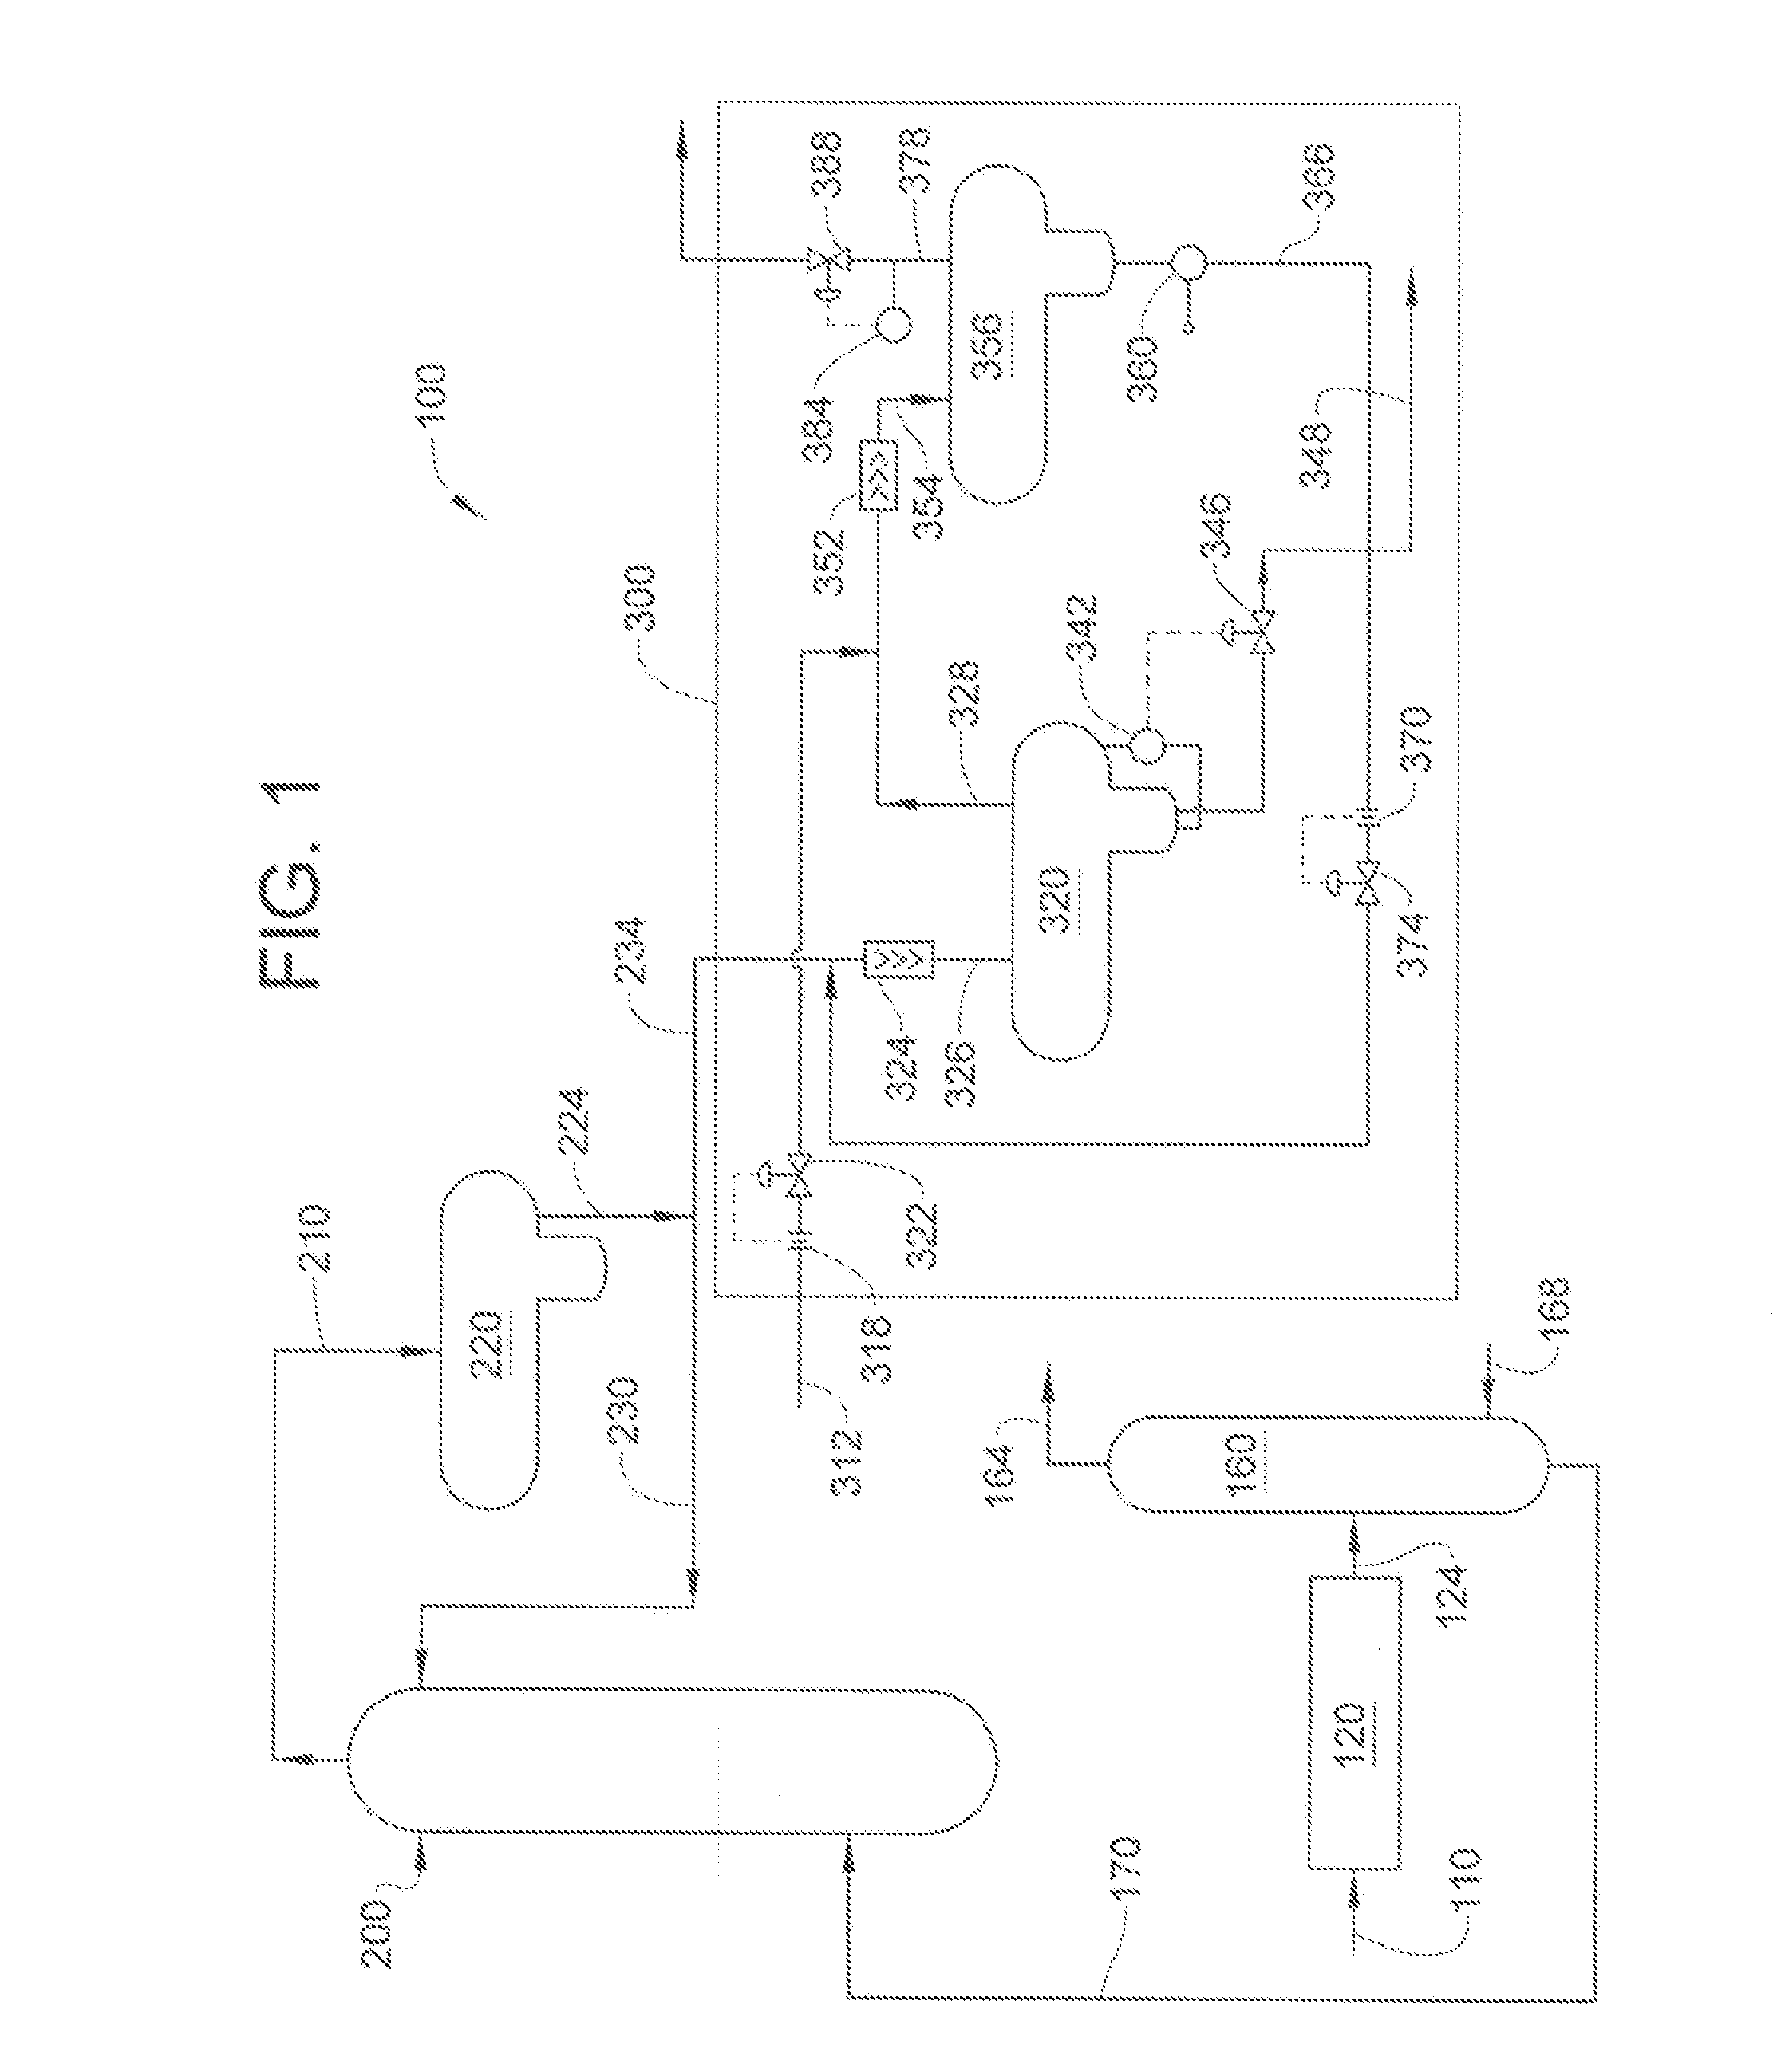 Process and apparatus for removing hydrogen sulfide